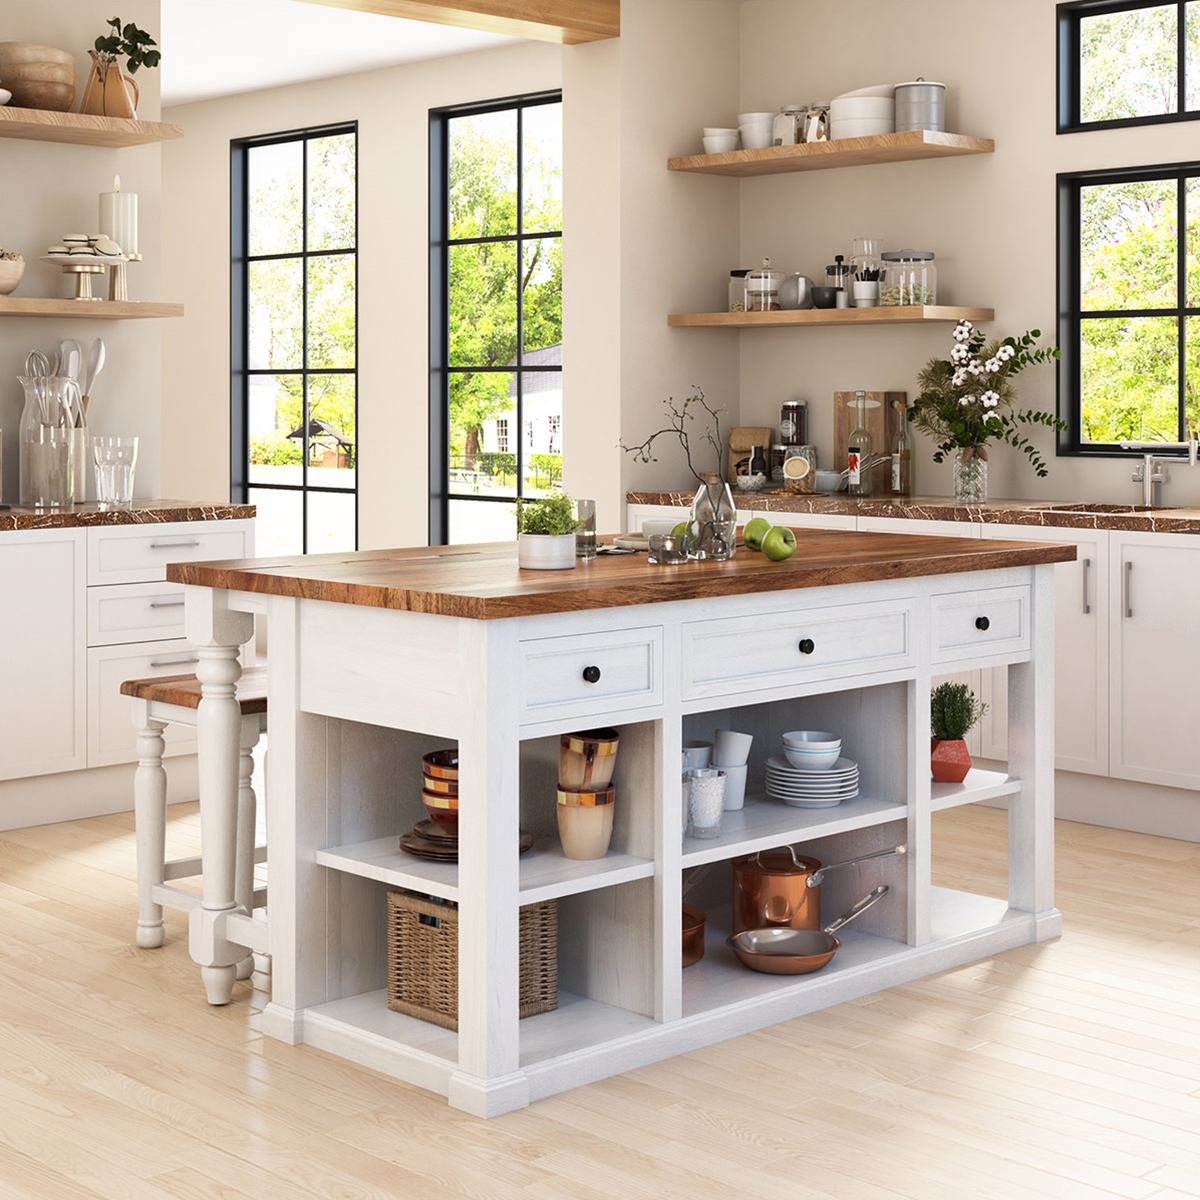 0409343 Rhinebeck Rustic Farmhouse Kitchen Island With Seating And Storage 